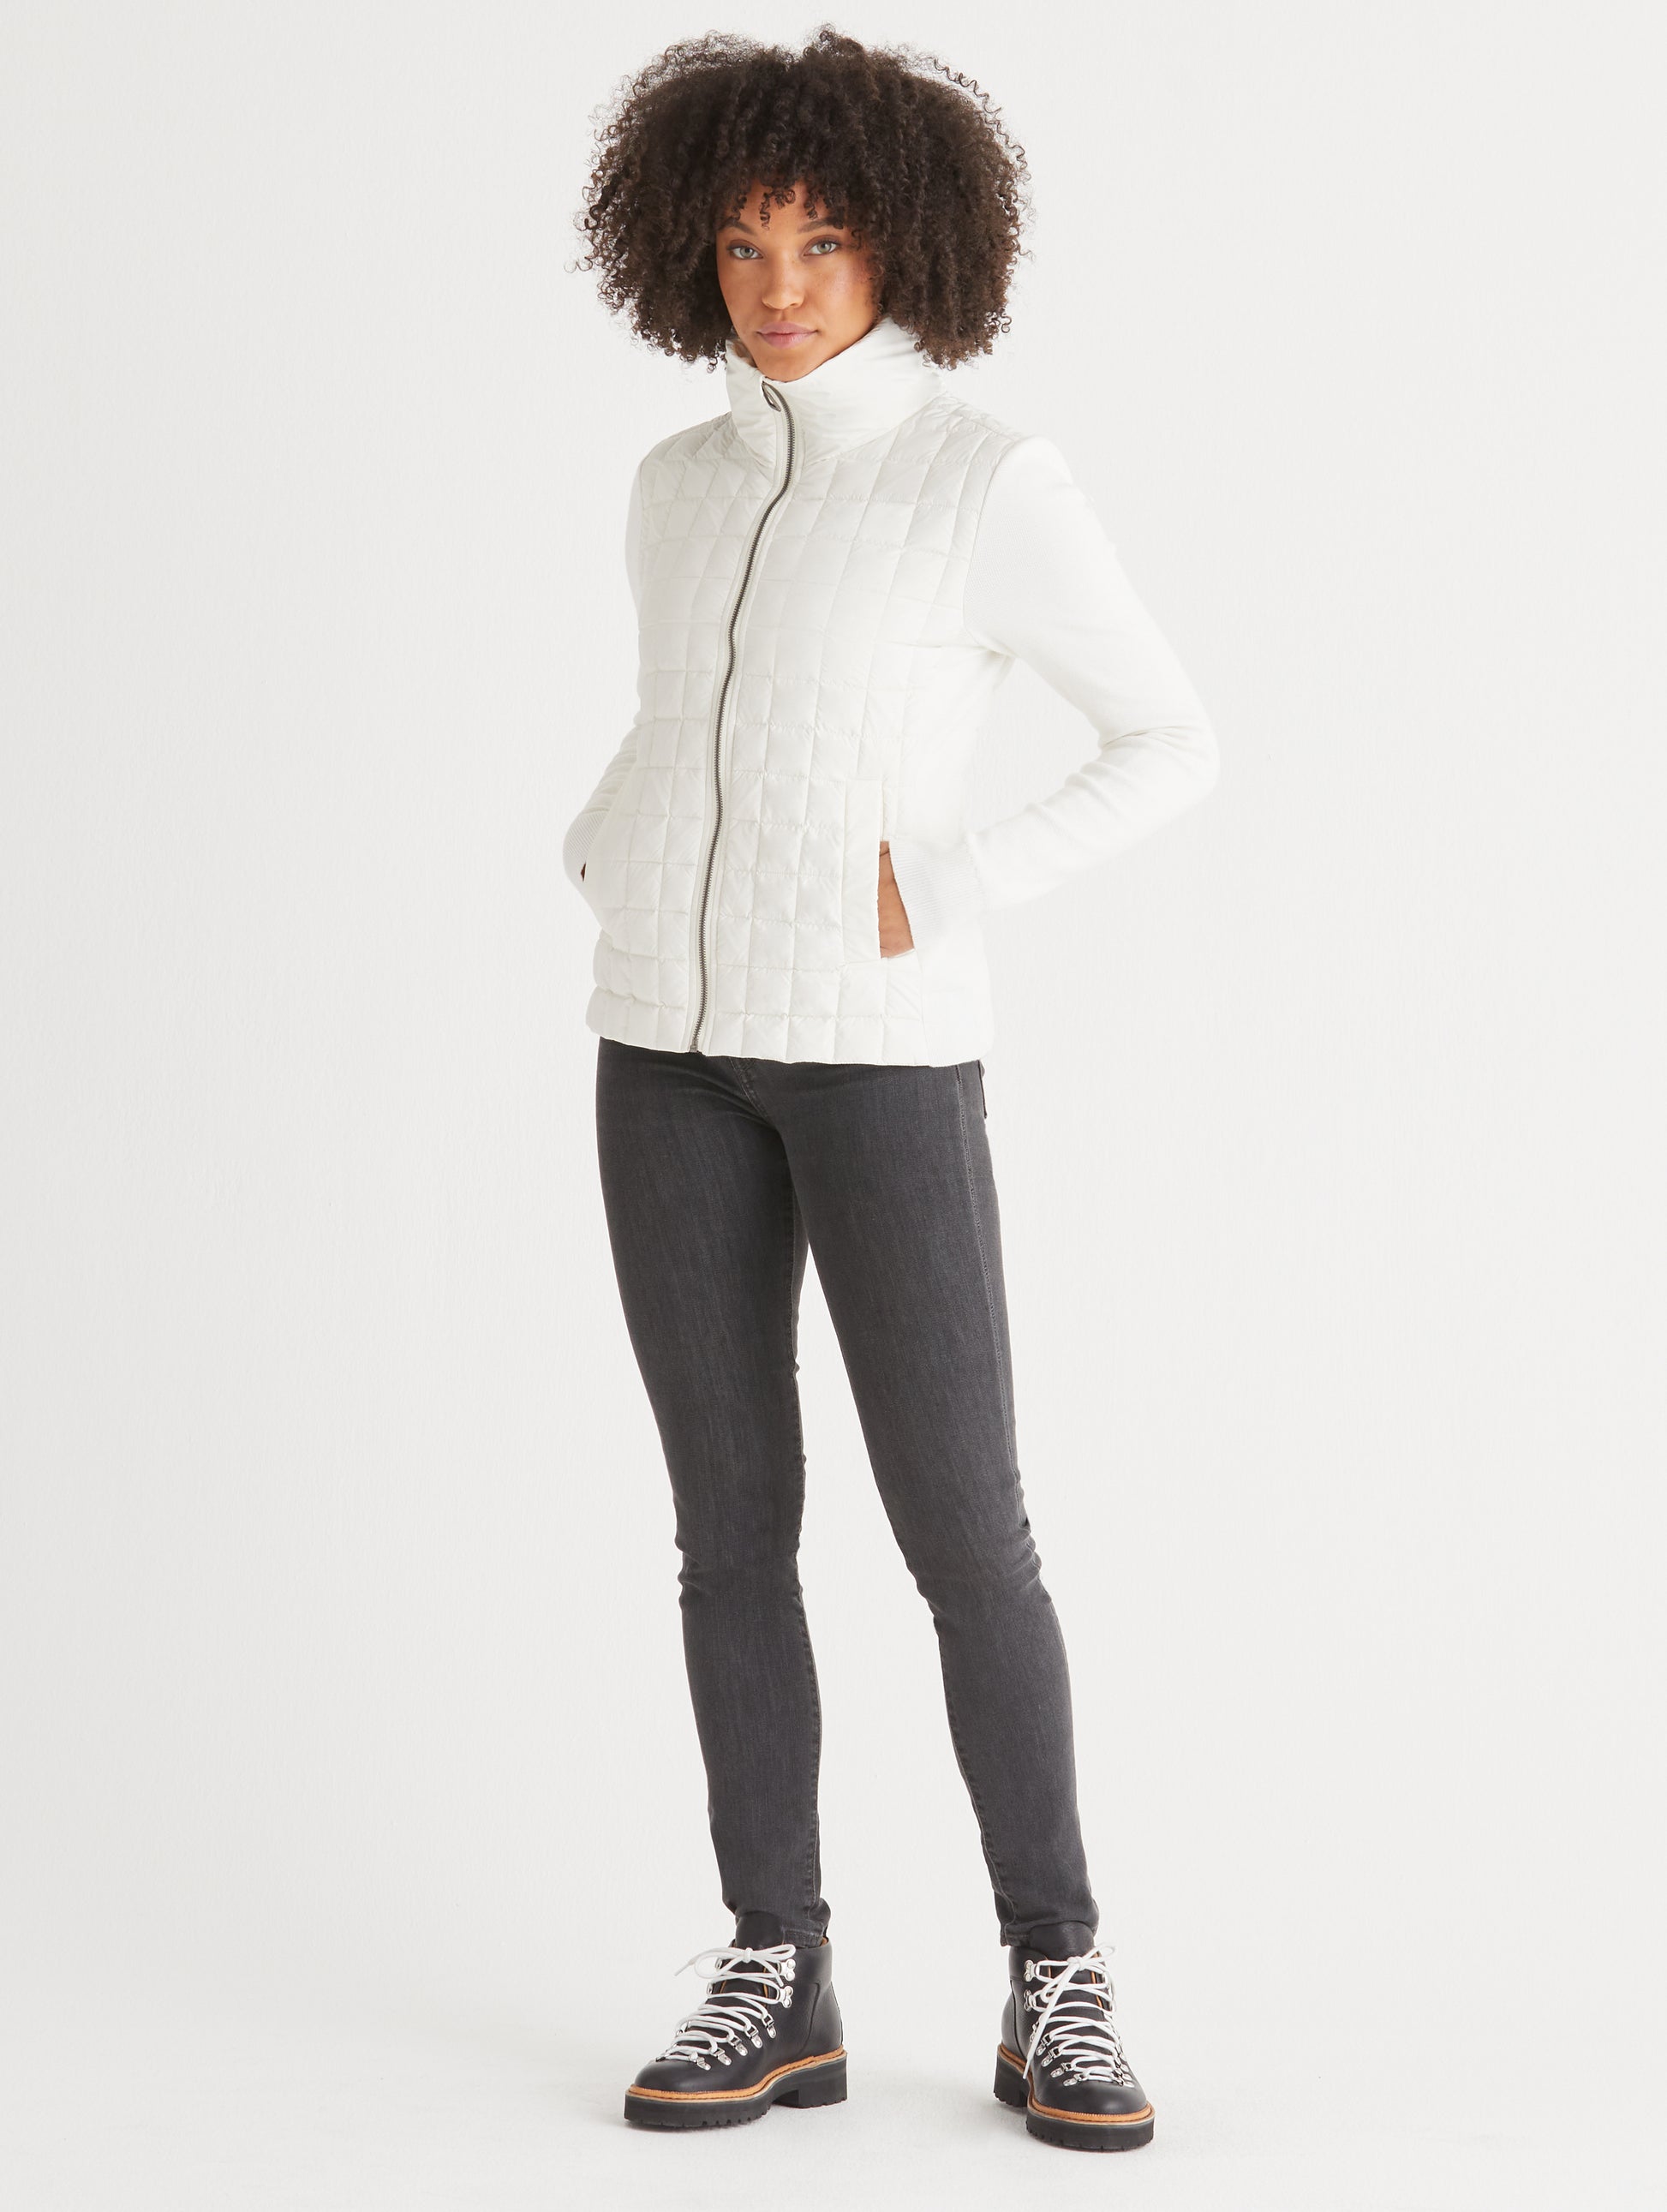 woman wearing quilted white full-zip sweater